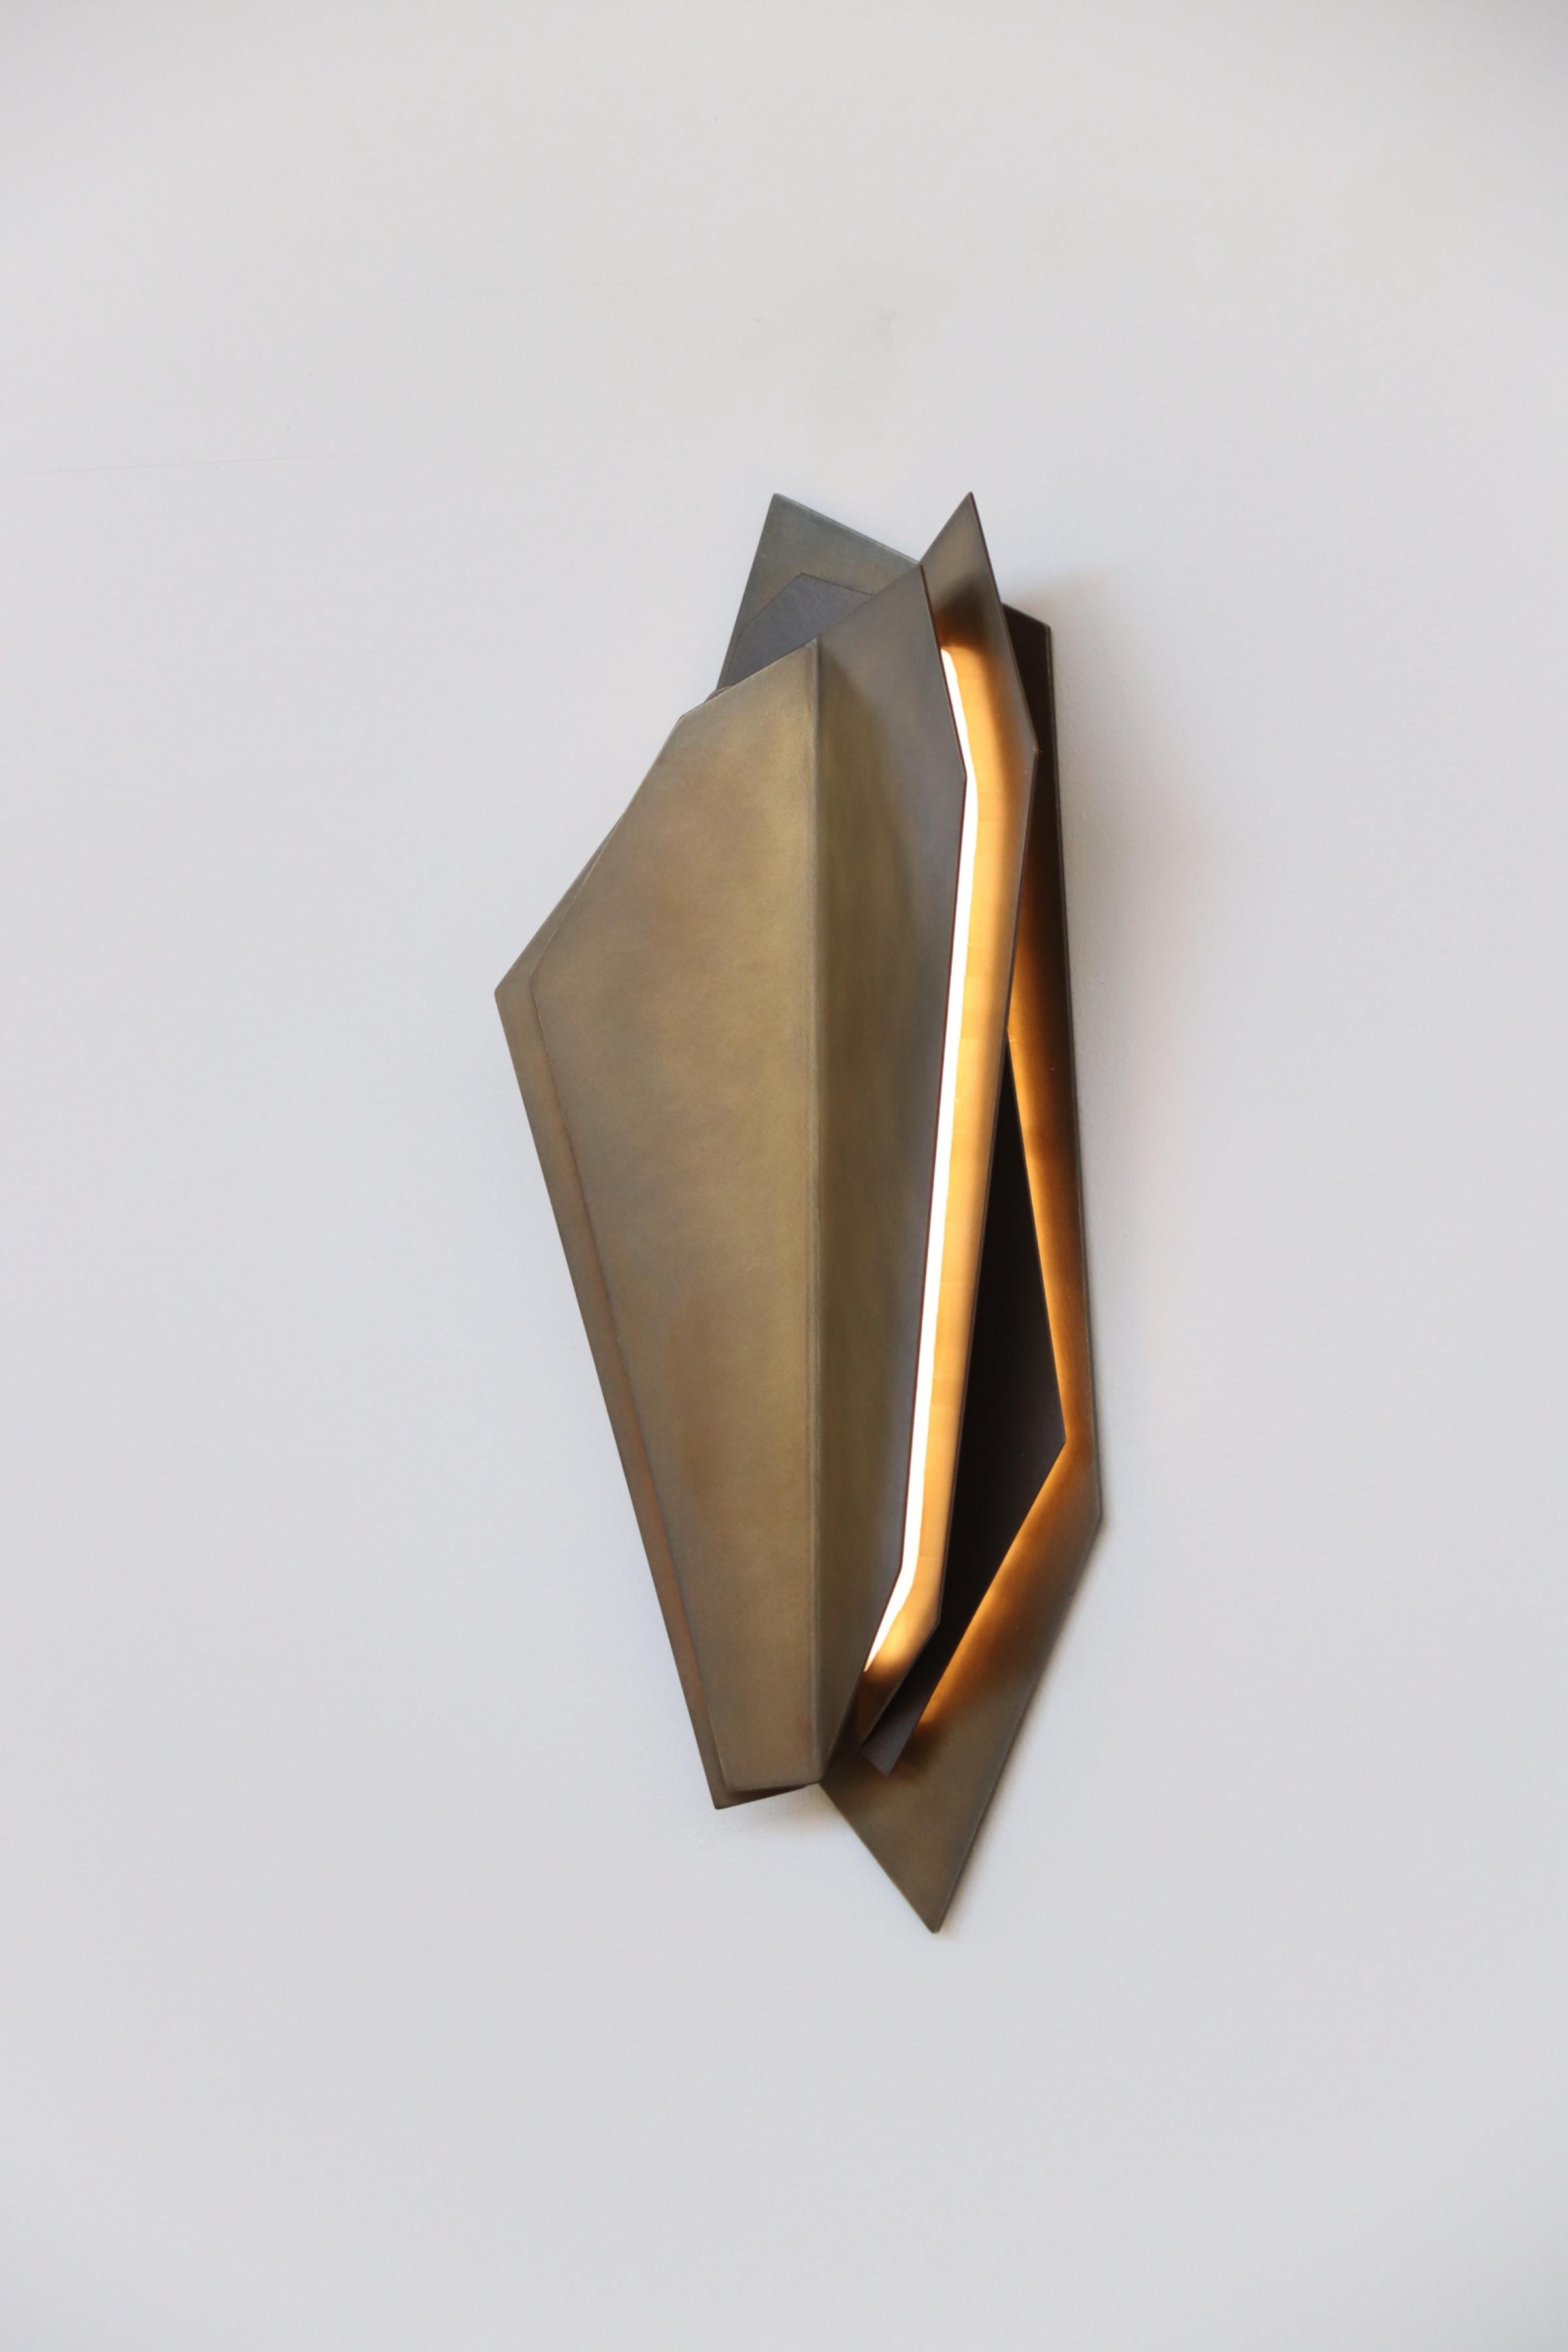 Continuum 500 Wall Sconce by Lost Profile Studio In New Condition For Sale In Geneve, CH